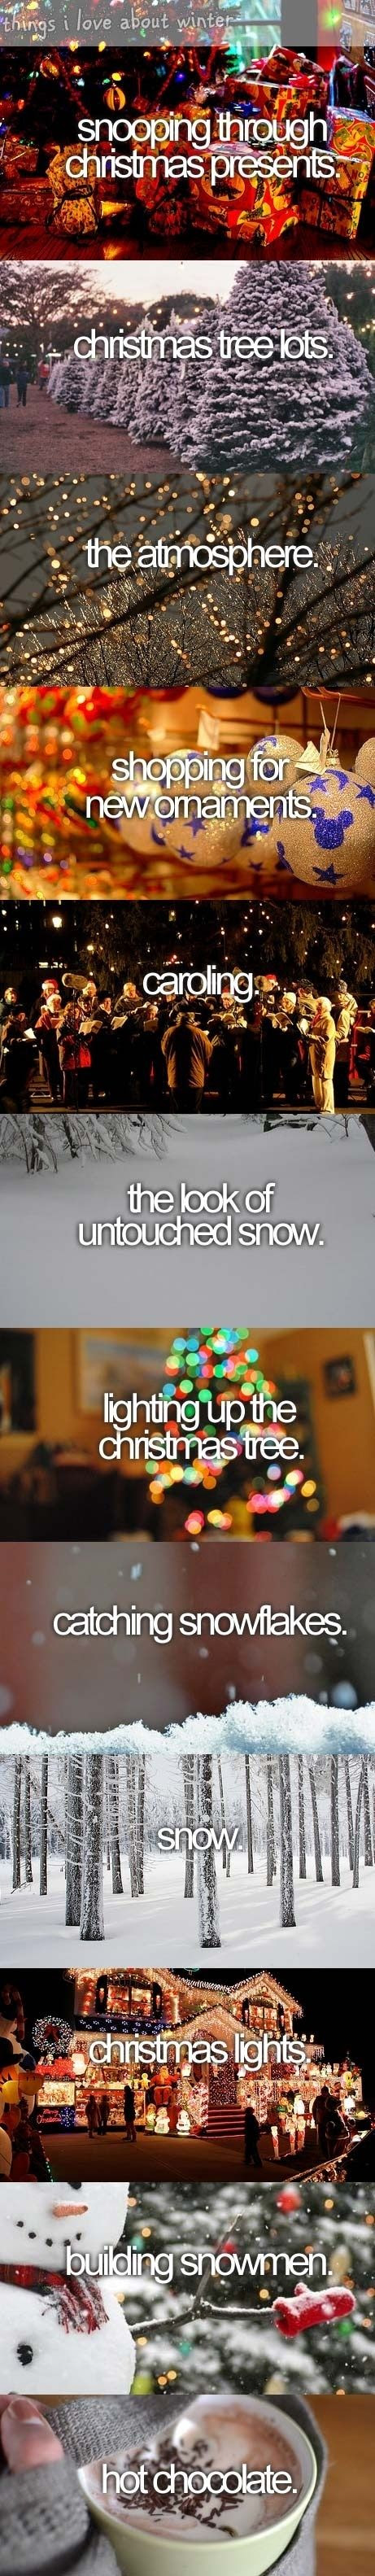 What I love about Christmas...